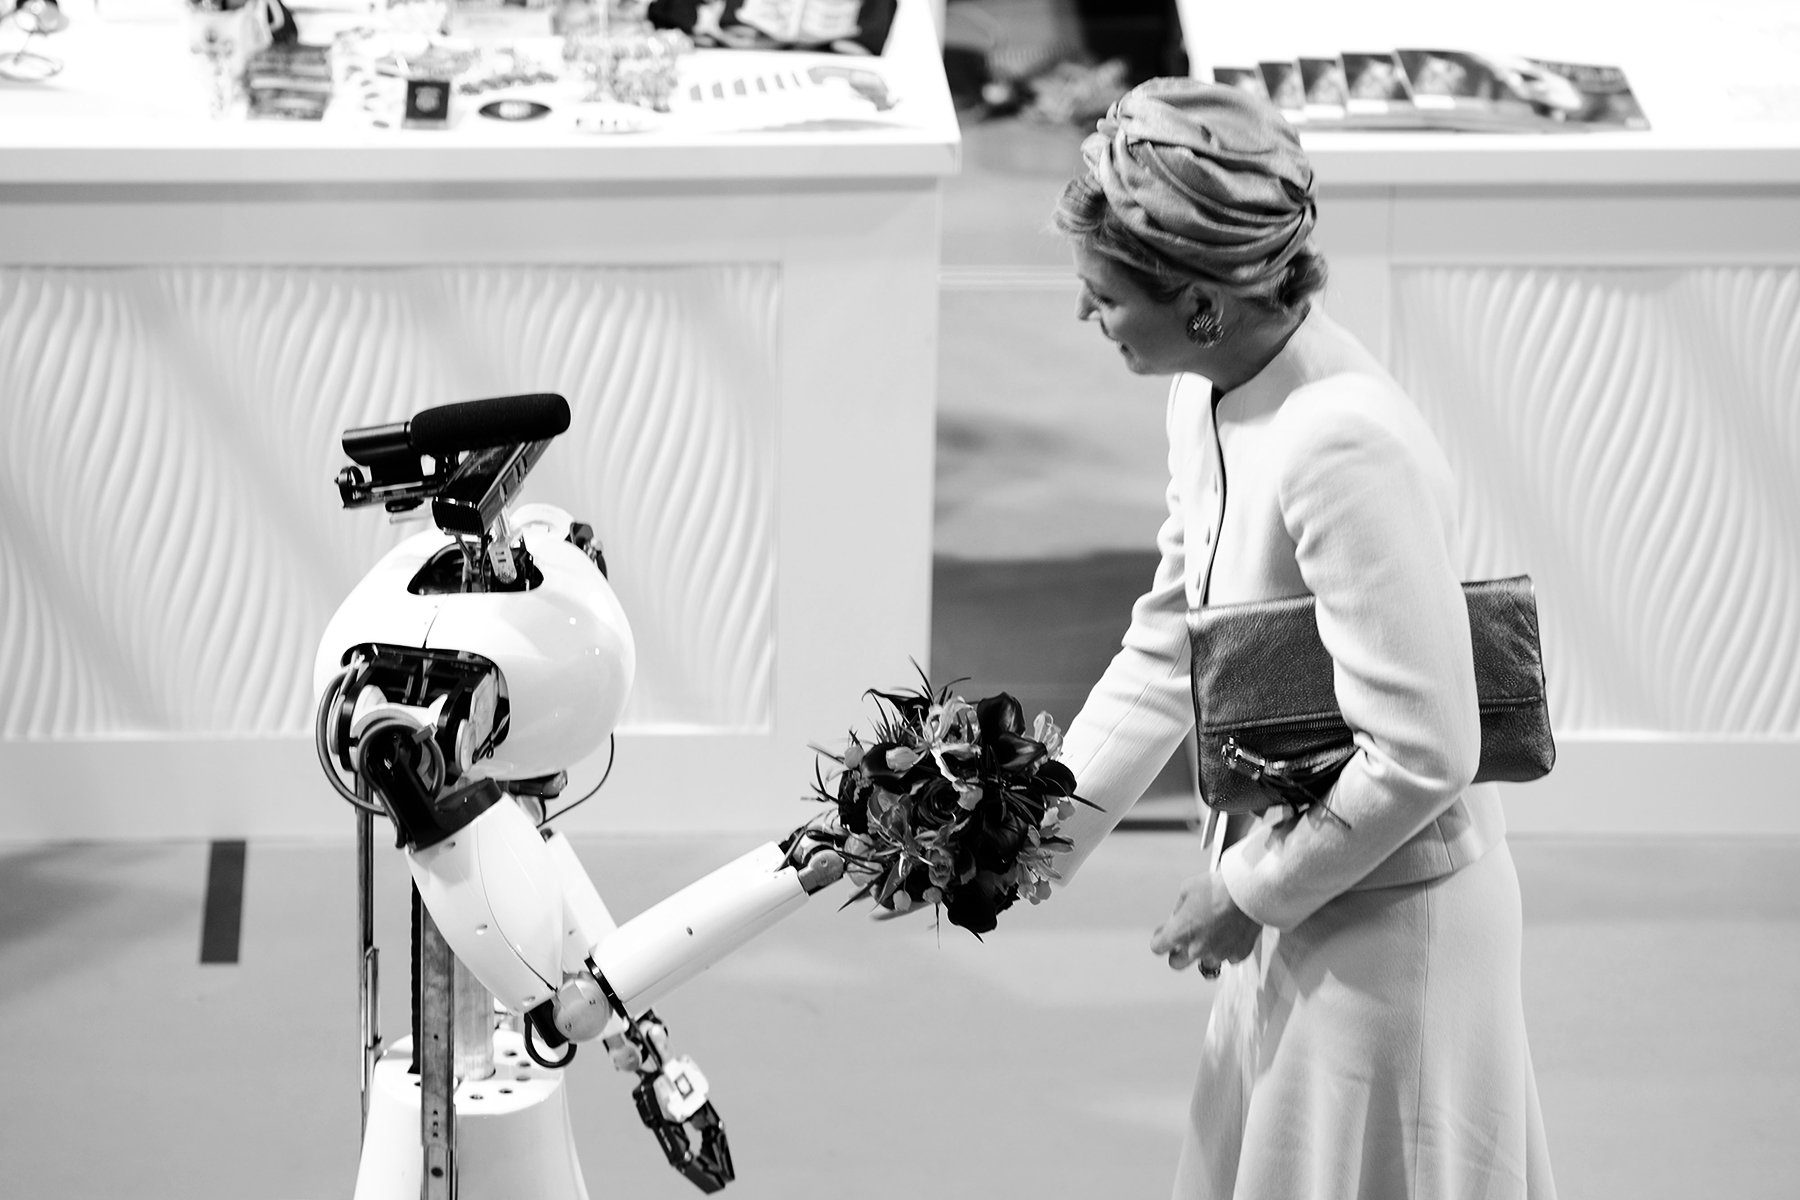 Maxima gets flowers from a robot